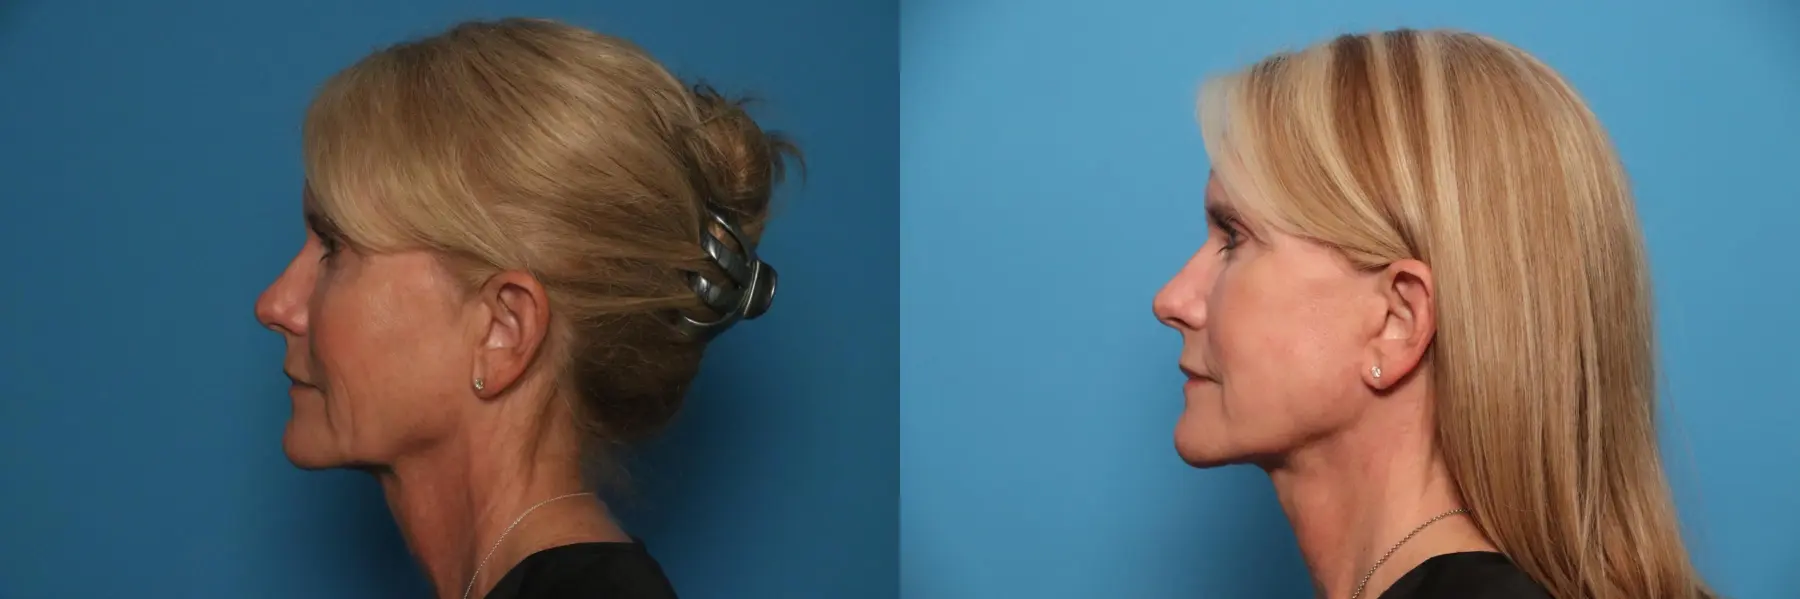 Mini Facelift: Patient 1 - Before and After 3